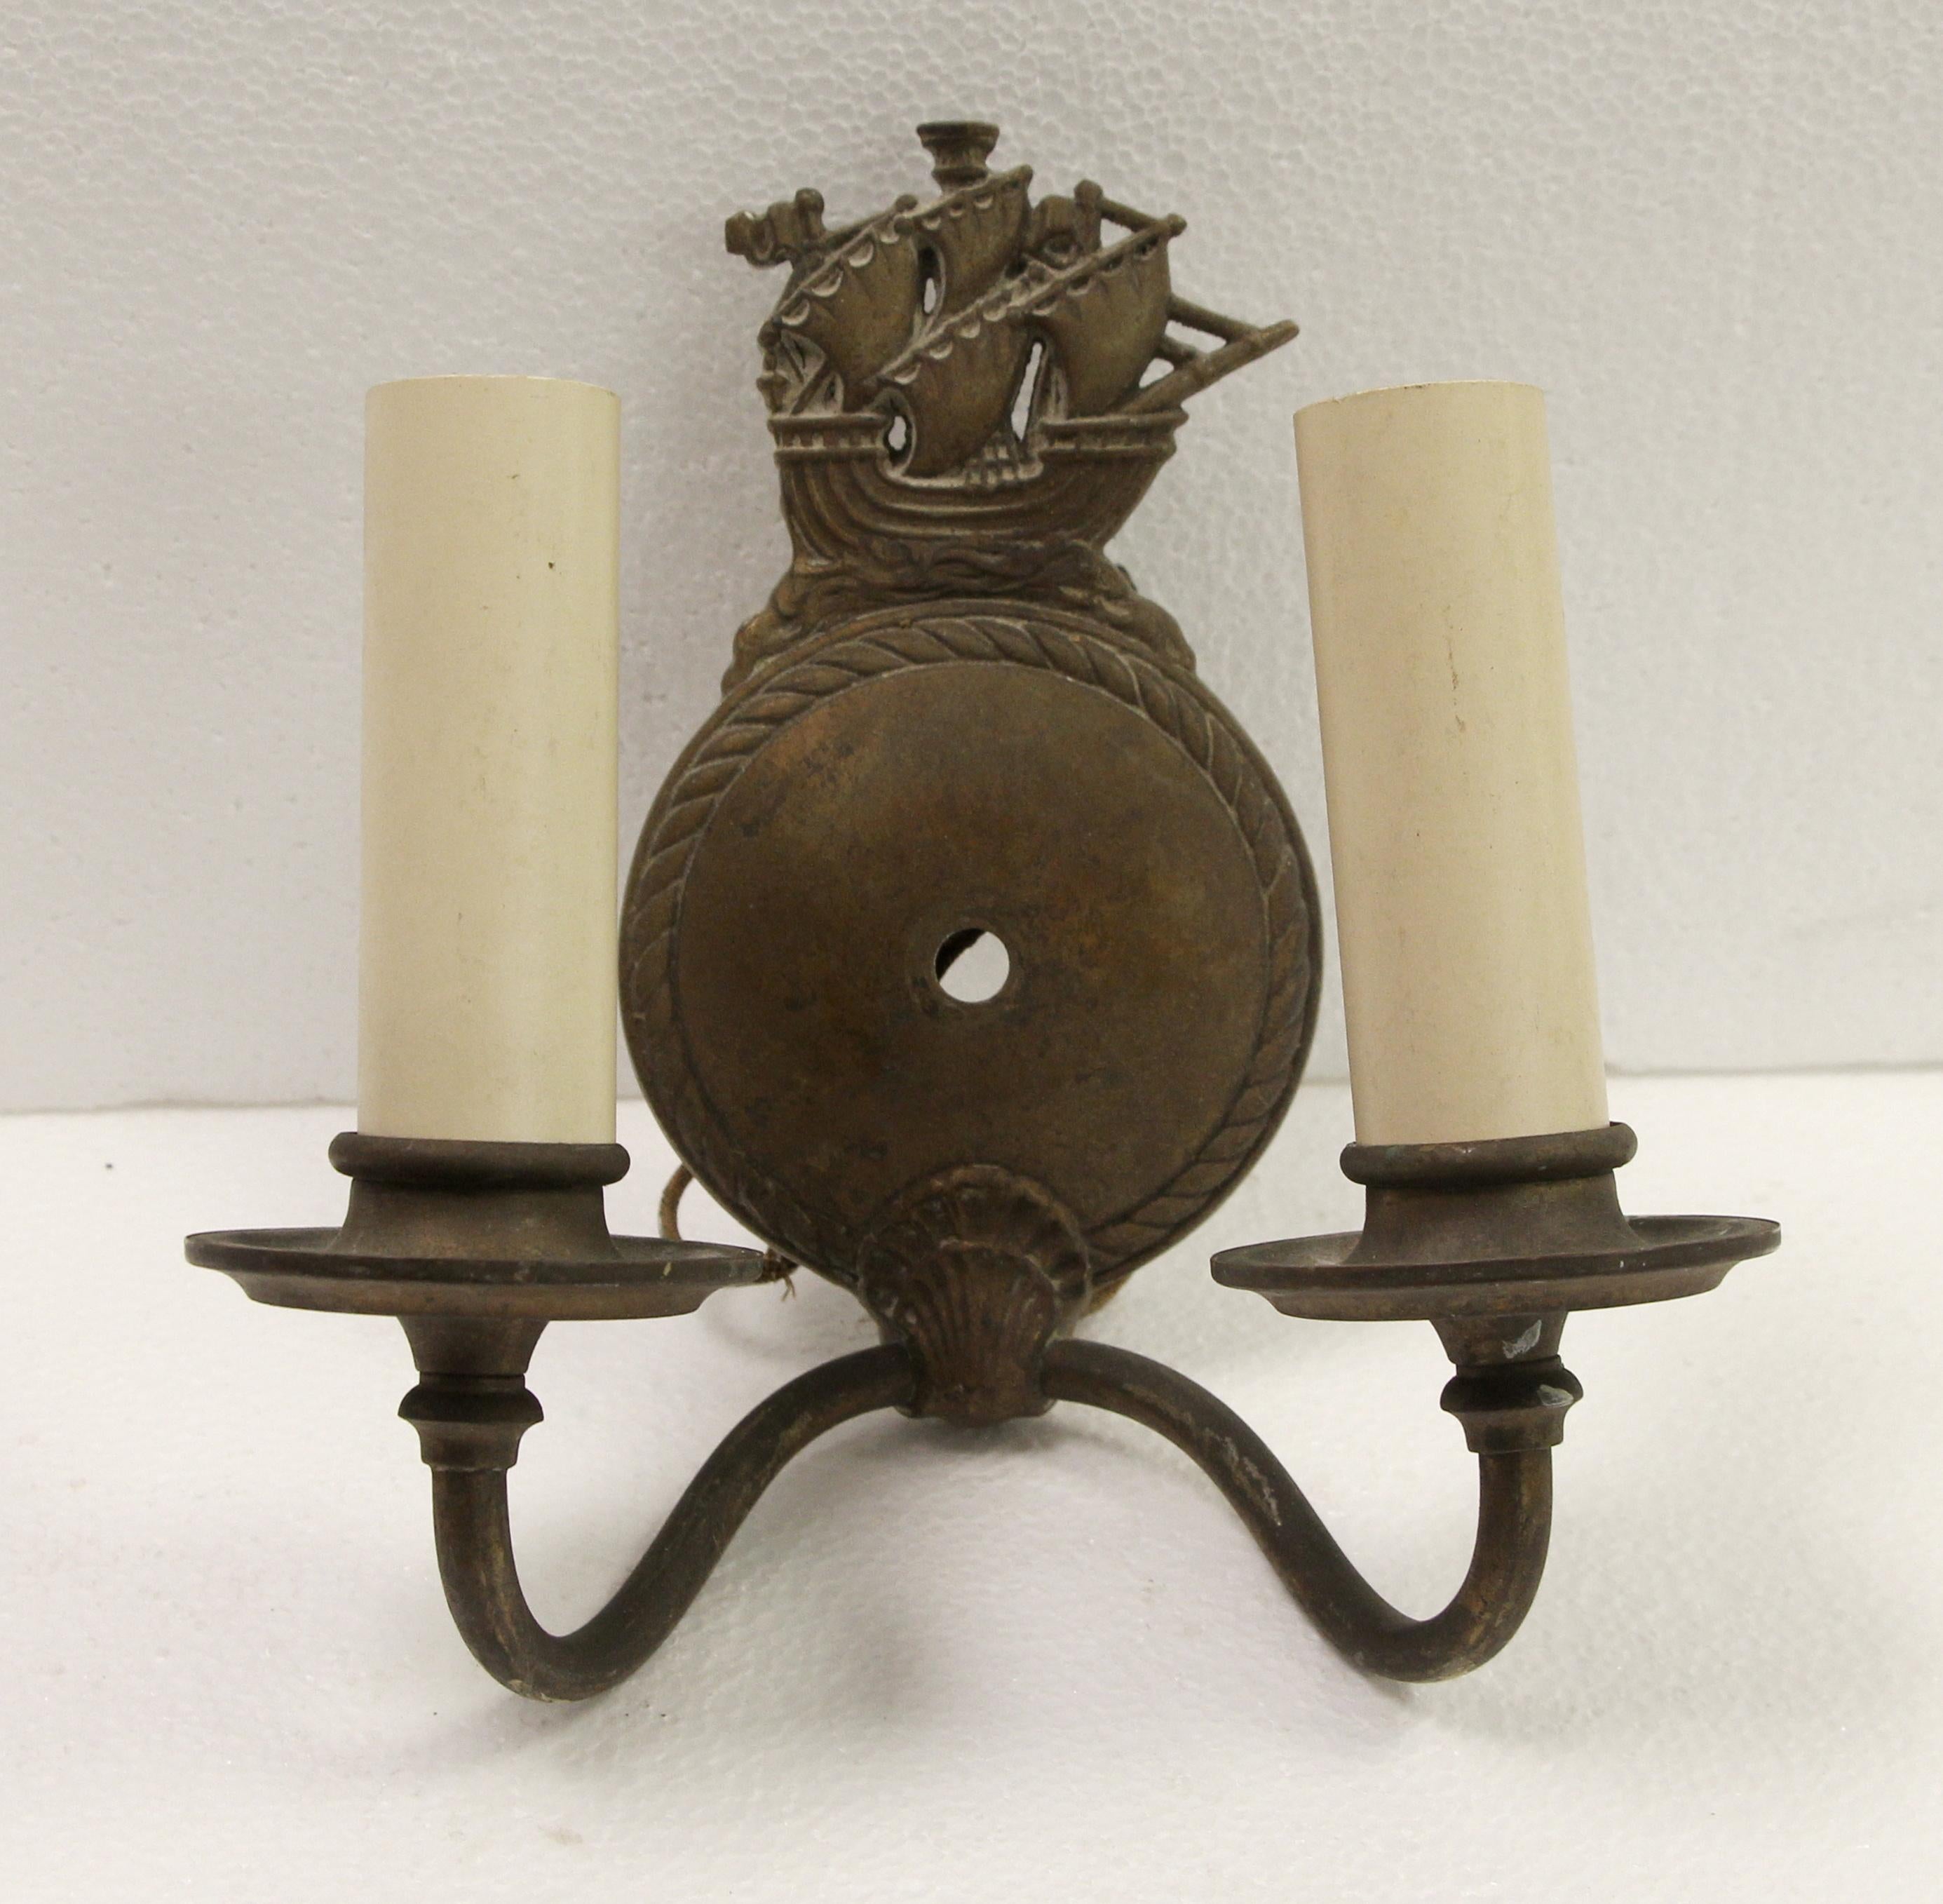 1940s nautical style two arm sconces with a sailing ship galleon motif at the top. Made of bronze in an antique finish. Sold as a pair. These will be cleaned and rewired before shipping. Please note, this item is located in our Scranton, PA location.